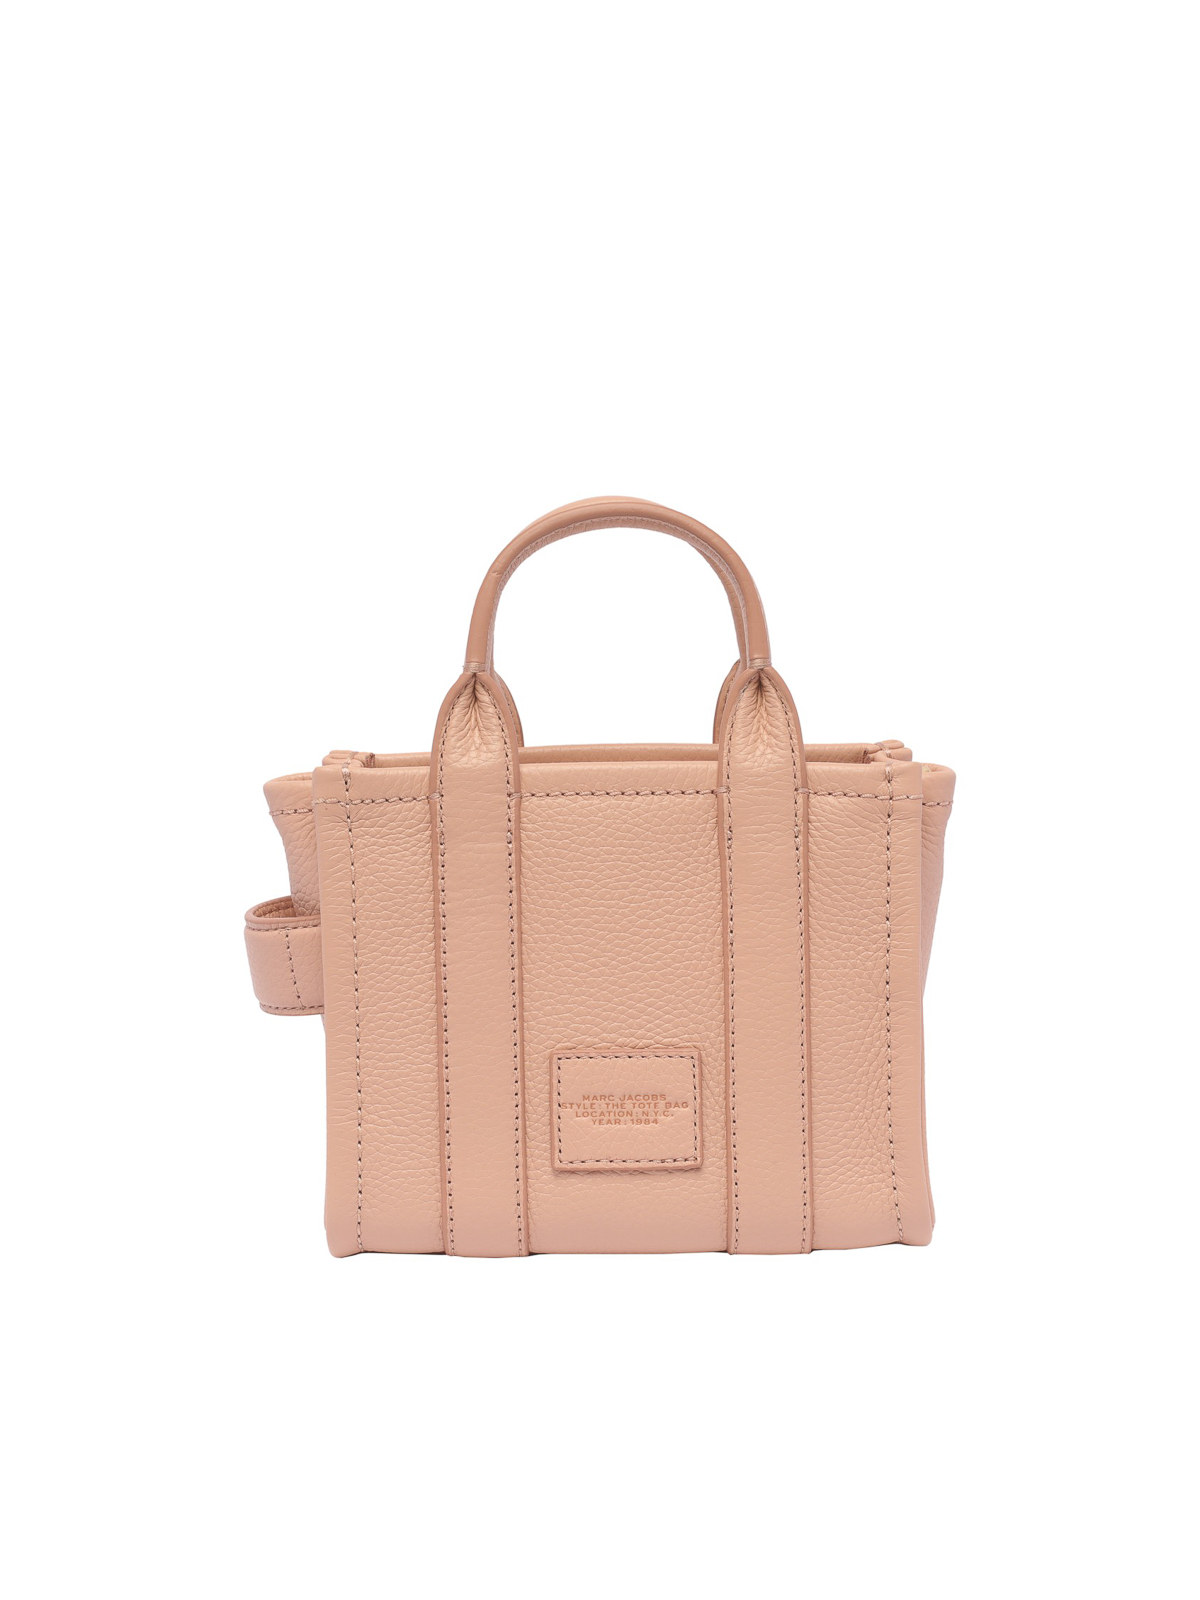 Shop Marc Jacobs The Micro Tote Bag In Pink